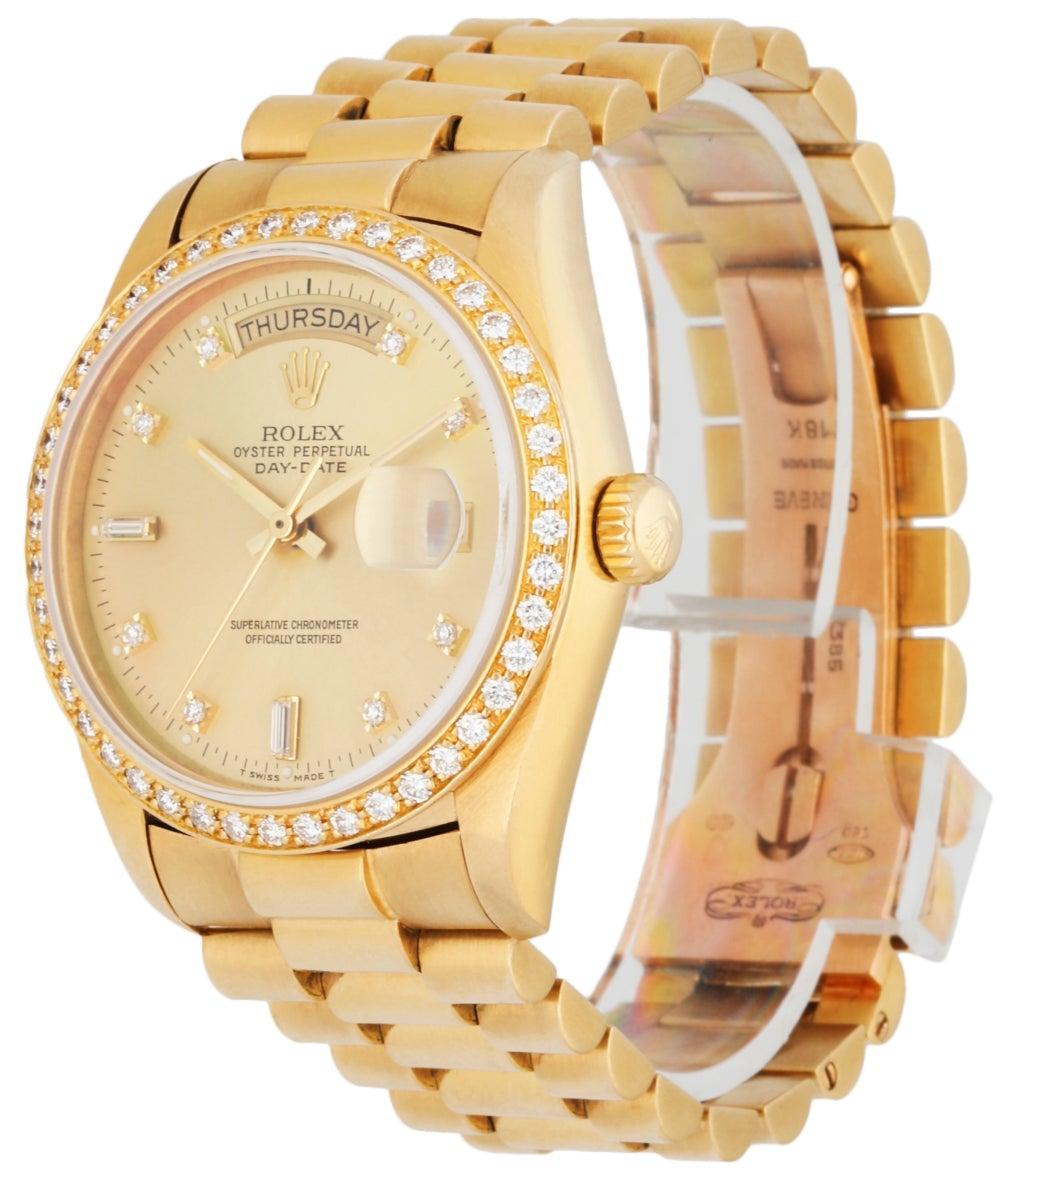 Rolex Oyster Perpetual Day-Date President 18048 Mens Watch. 36mm 18k yellow gold case. 18k yellow gold bezel with factory diamonds. Champagne dial with gold hands and factory diamonds hour marker. Day display at 12 o'clock position. Date display at